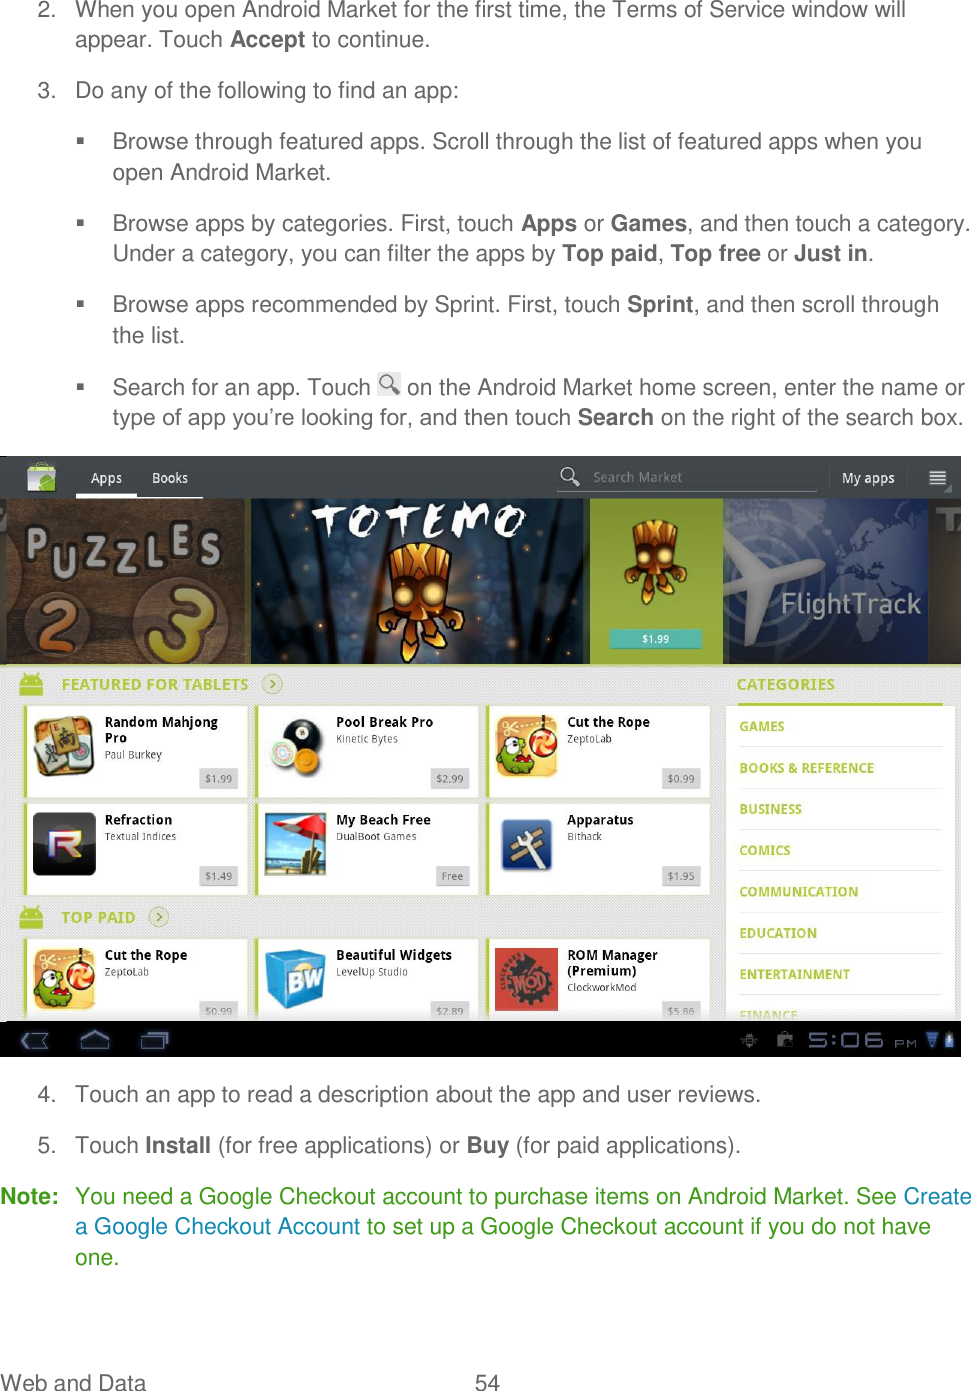 Web and Data  54   2.  When you open Android Market for the first time, the Terms of Service window will appear. Touch Accept to continue. 3.  Do any of the following to find an app:   Browse through featured apps. Scroll through the list of featured apps when you open Android Market.   Browse apps by categories. First, touch Apps or Games, and then touch a category. Under a category, you can filter the apps by Top paid, Top free or Just in.   Browse apps recommended by Sprint. First, touch Sprint, and then scroll through the list.   Search for an app. Touch   on the Android Market home screen, enter the name or type of app you’re looking for, and then touch Search on the right of the search box.  4.  Touch an app to read a description about the app and user reviews. 5.  Touch Install (for free applications) or Buy (for paid applications). Note:  You need a Google Checkout account to purchase items on Android Market. See Create a Google Checkout Account to set up a Google Checkout account if you do not have one. 